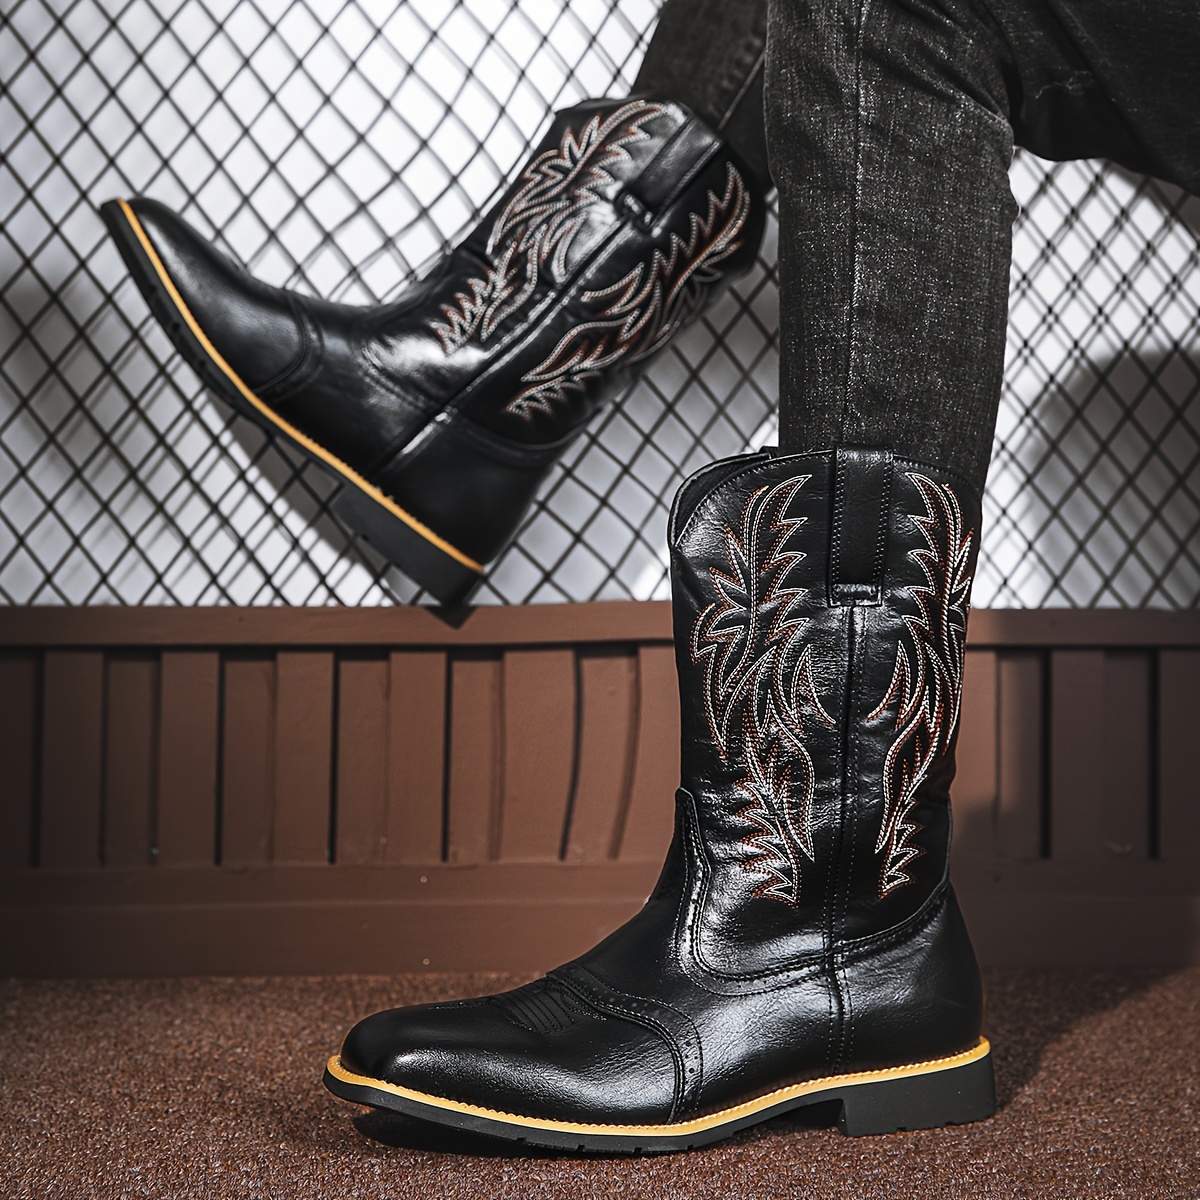 PMUYBHF western boots for men in men's shoes boots